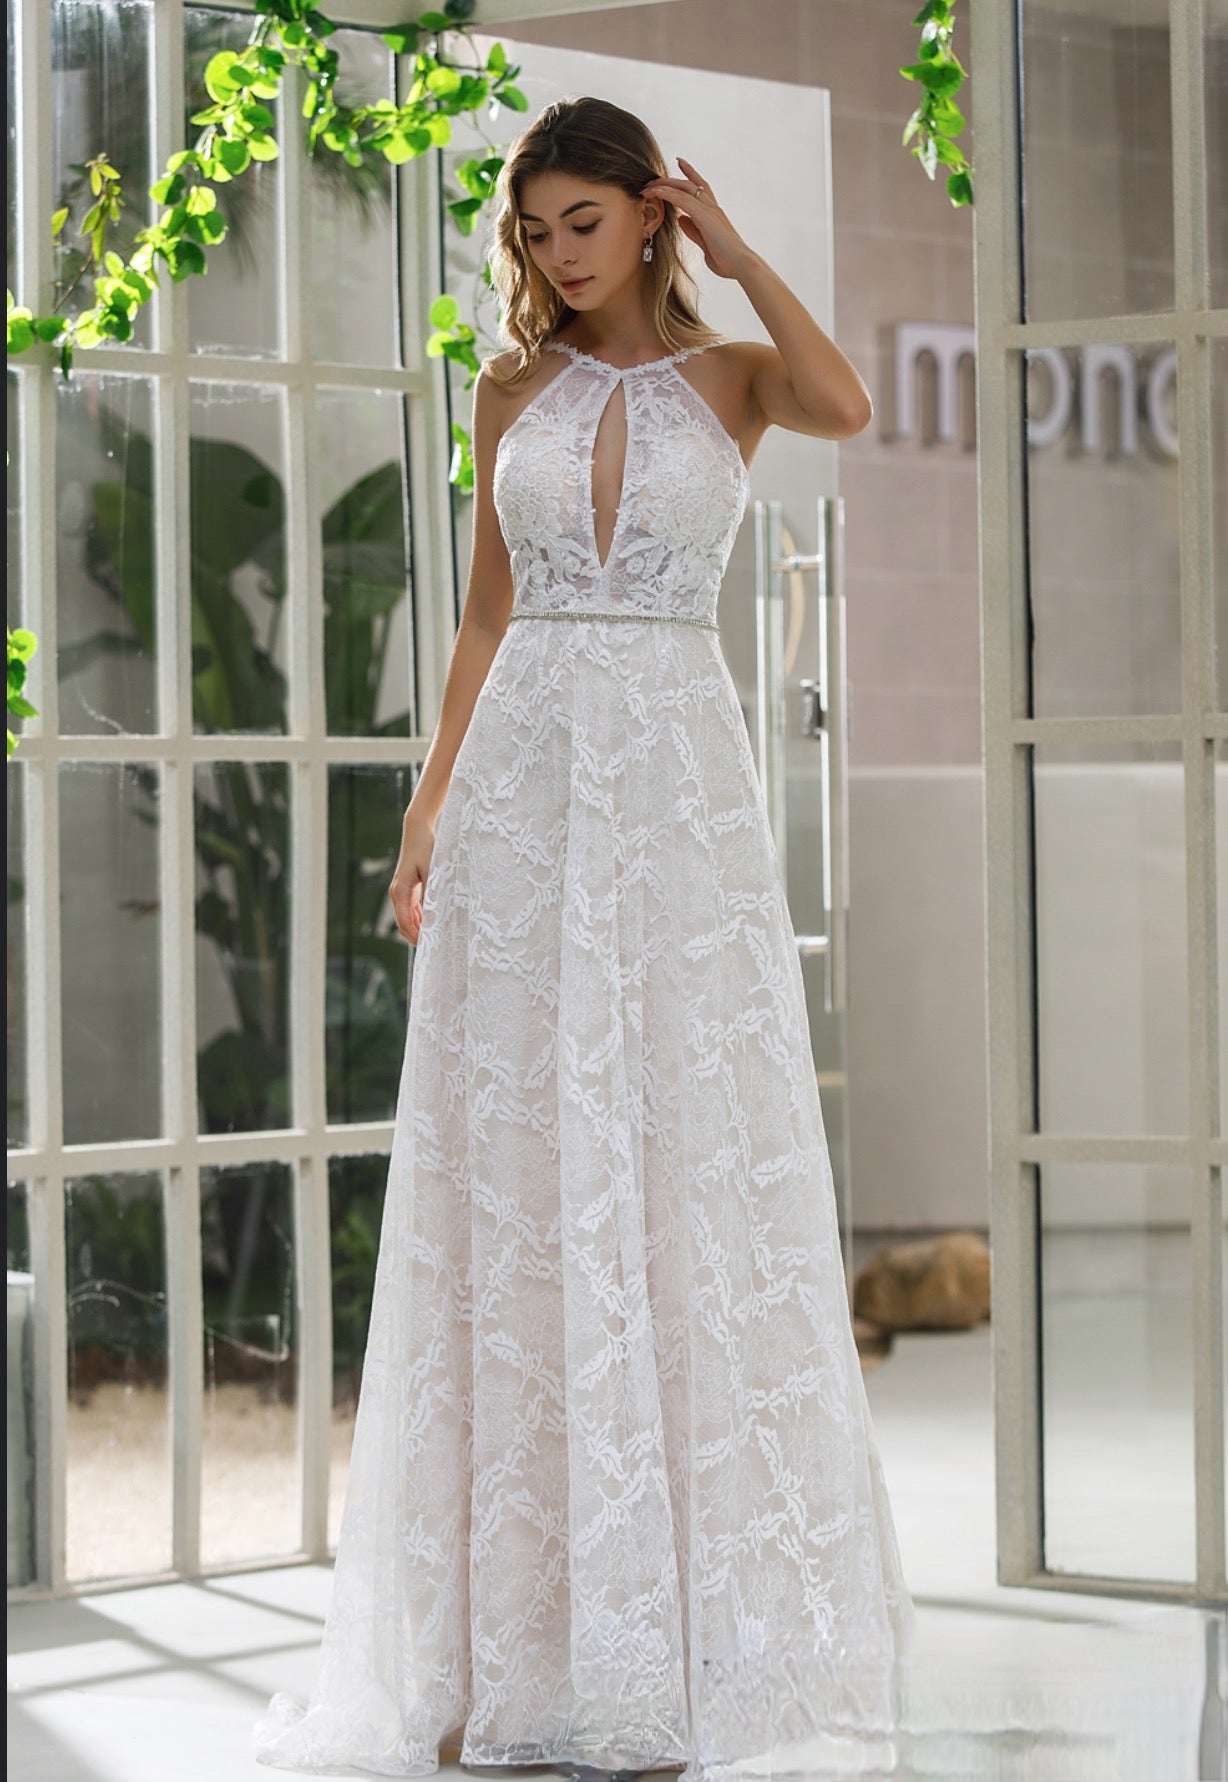 Load image into Gallery viewer, Halter Neckline Lace Bridal Gown With Crisscross Back
